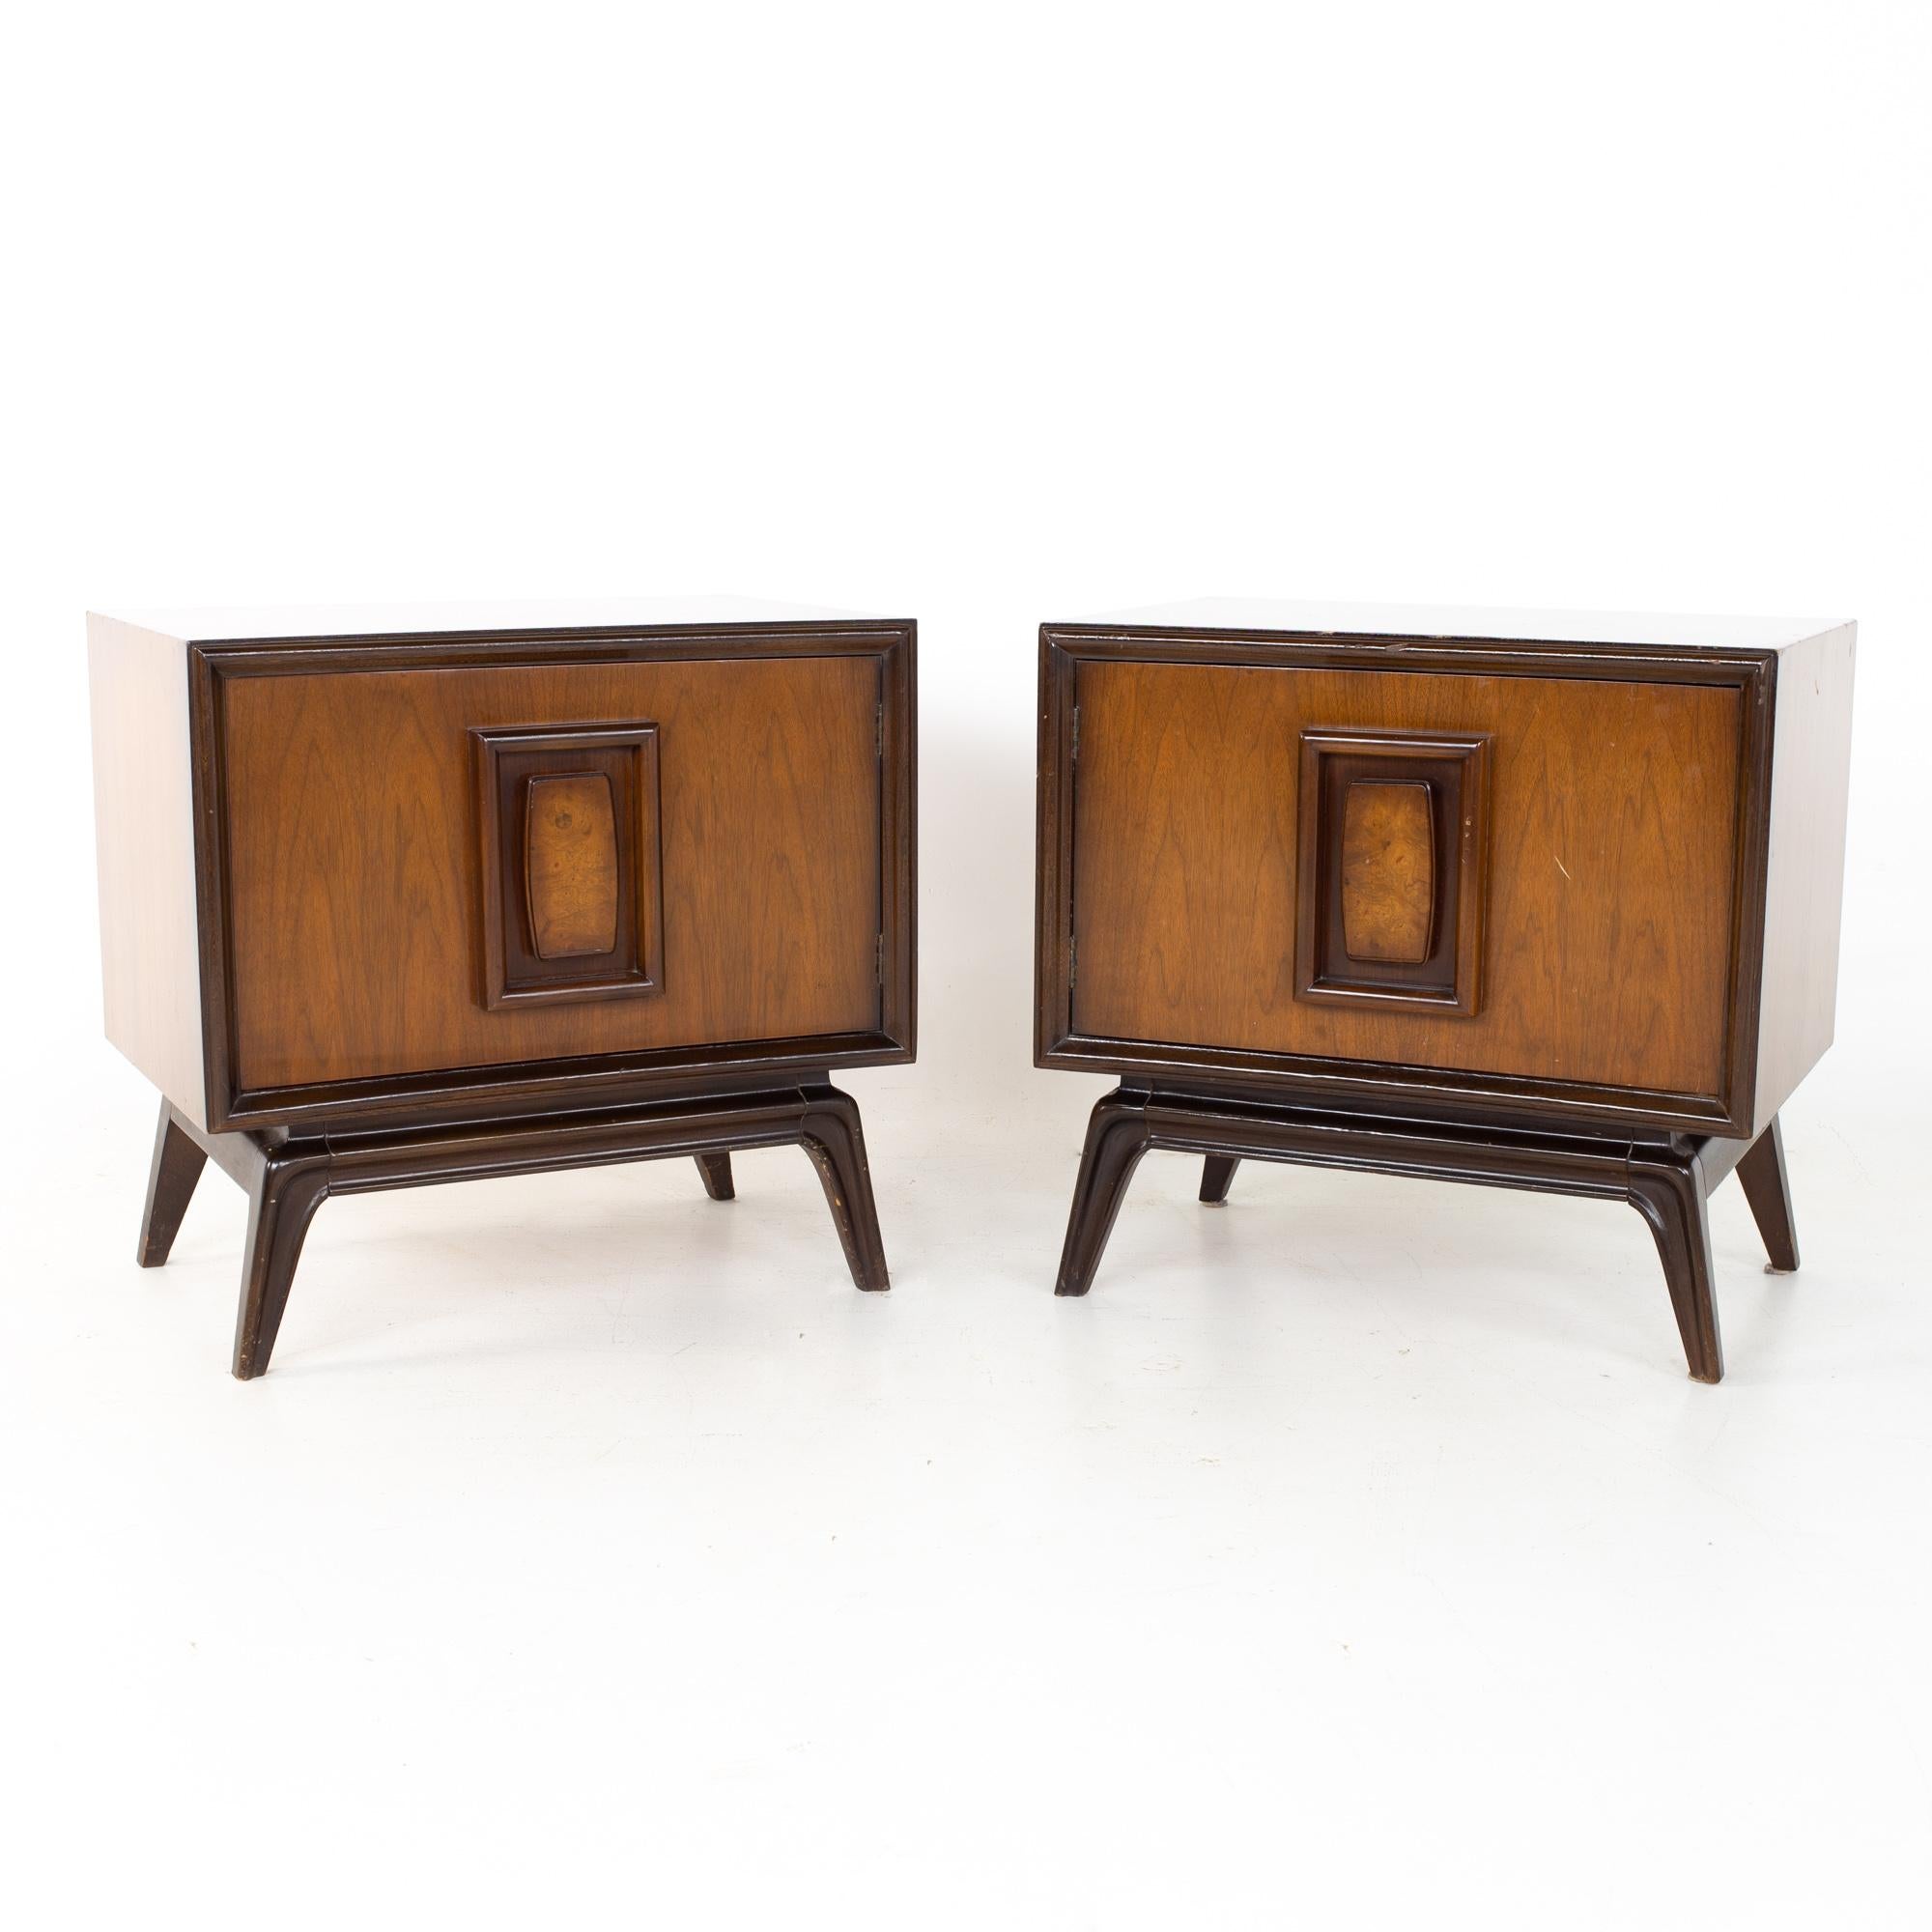 Hoke Wood Products mid century walnut and burlwood nightstands - a pair

Each nightstand measures: 26 wide x 18 deep x 25 inches high

All pieces of furniture can be had in what we call restored vintage condition. That means the piece is